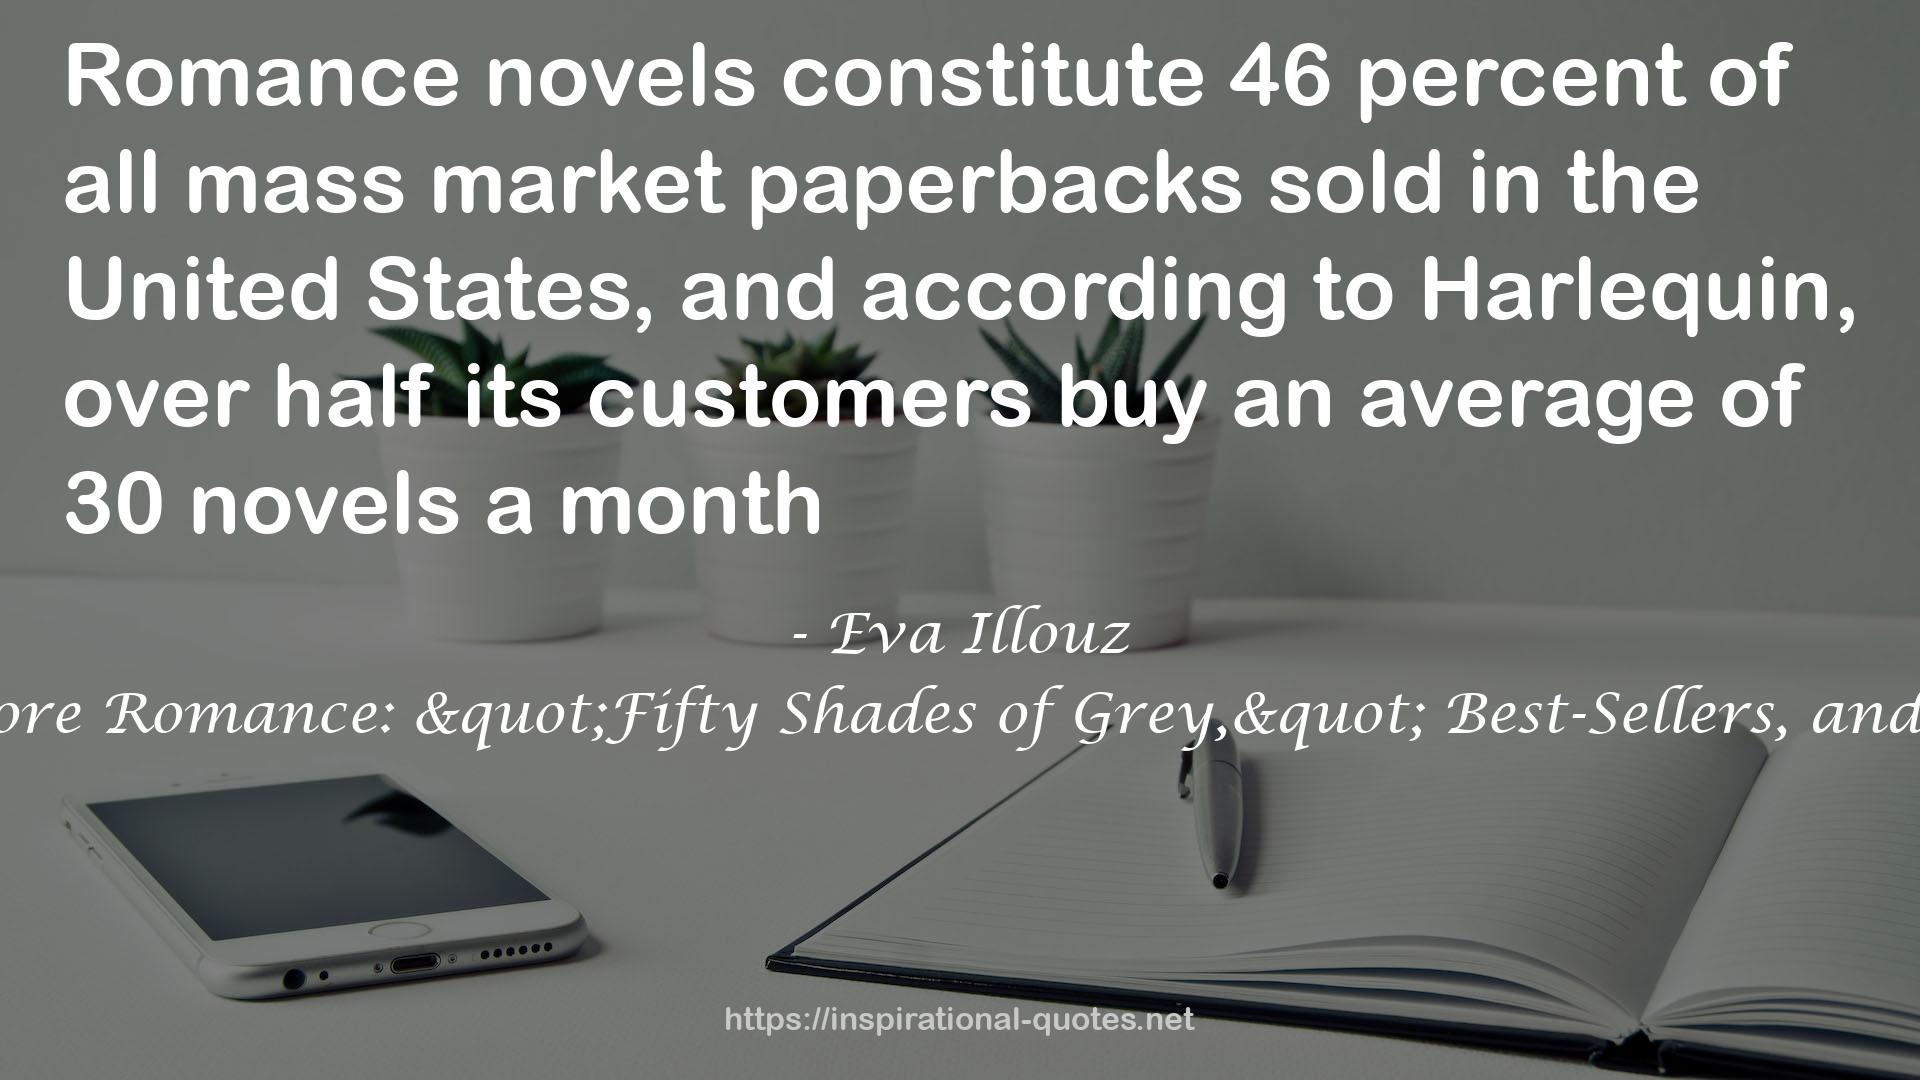 Hard-Core Romance: "Fifty Shades of Grey," Best-Sellers, and Society QUOTES